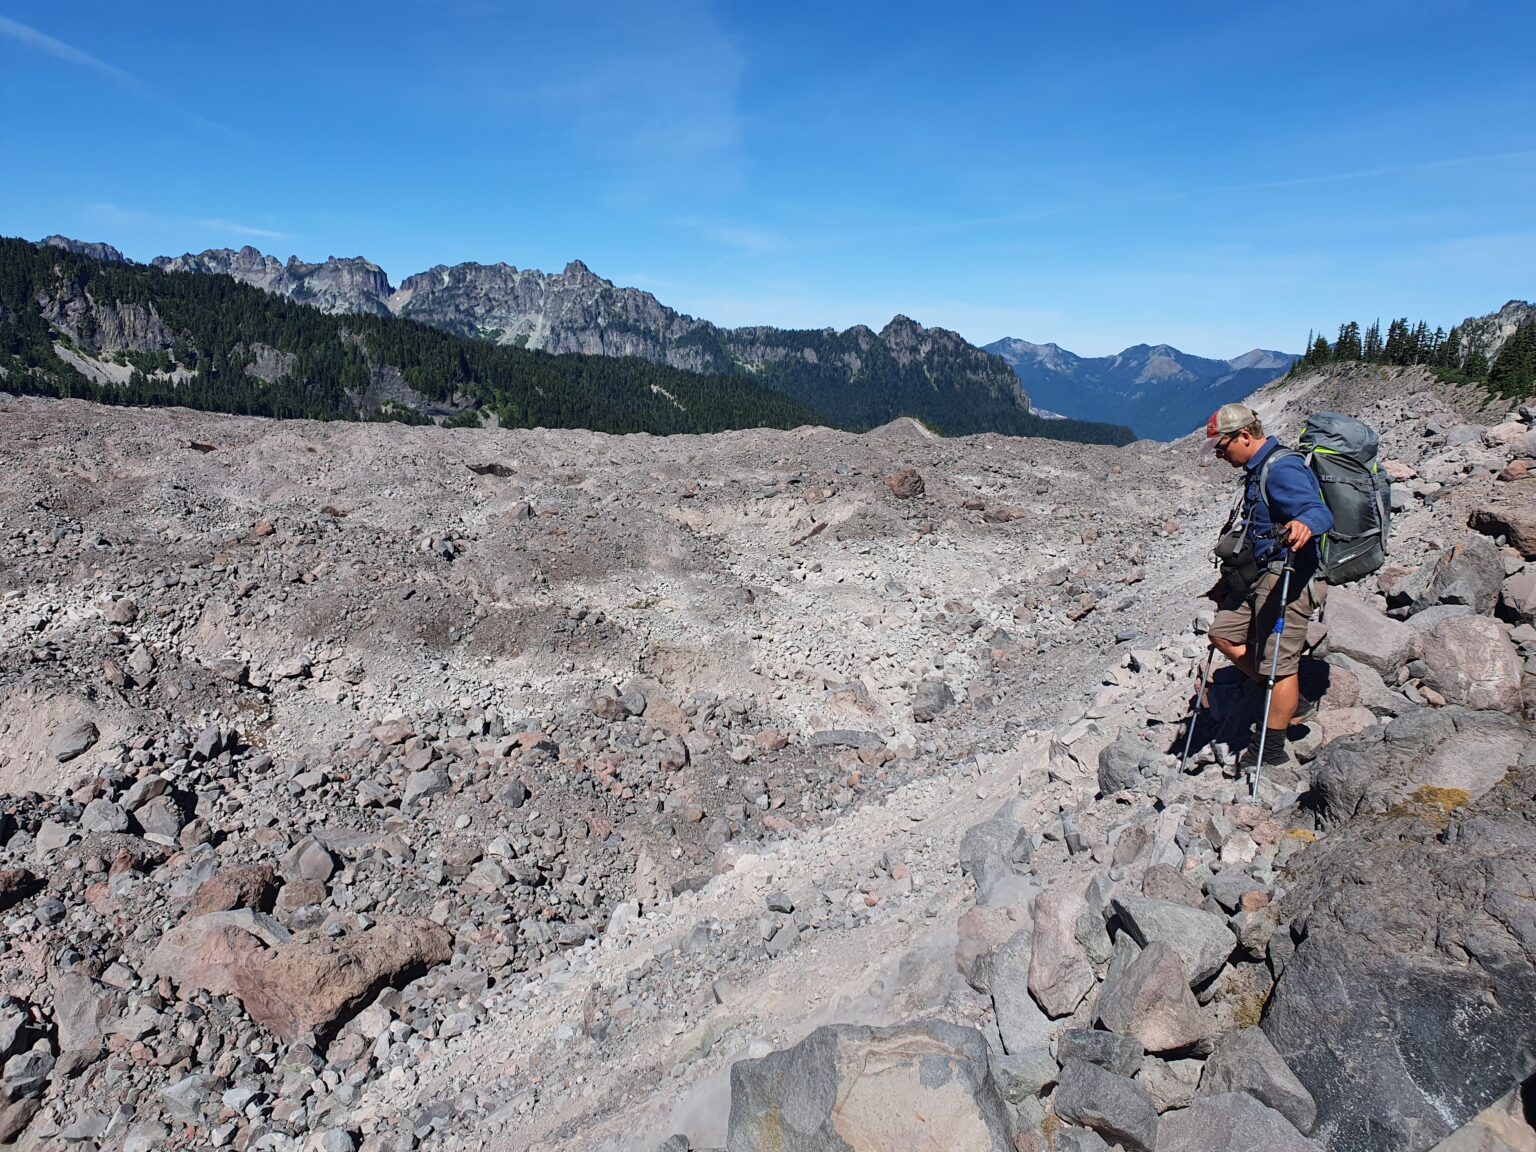 About to make our first steps onto the Carbon Glacier